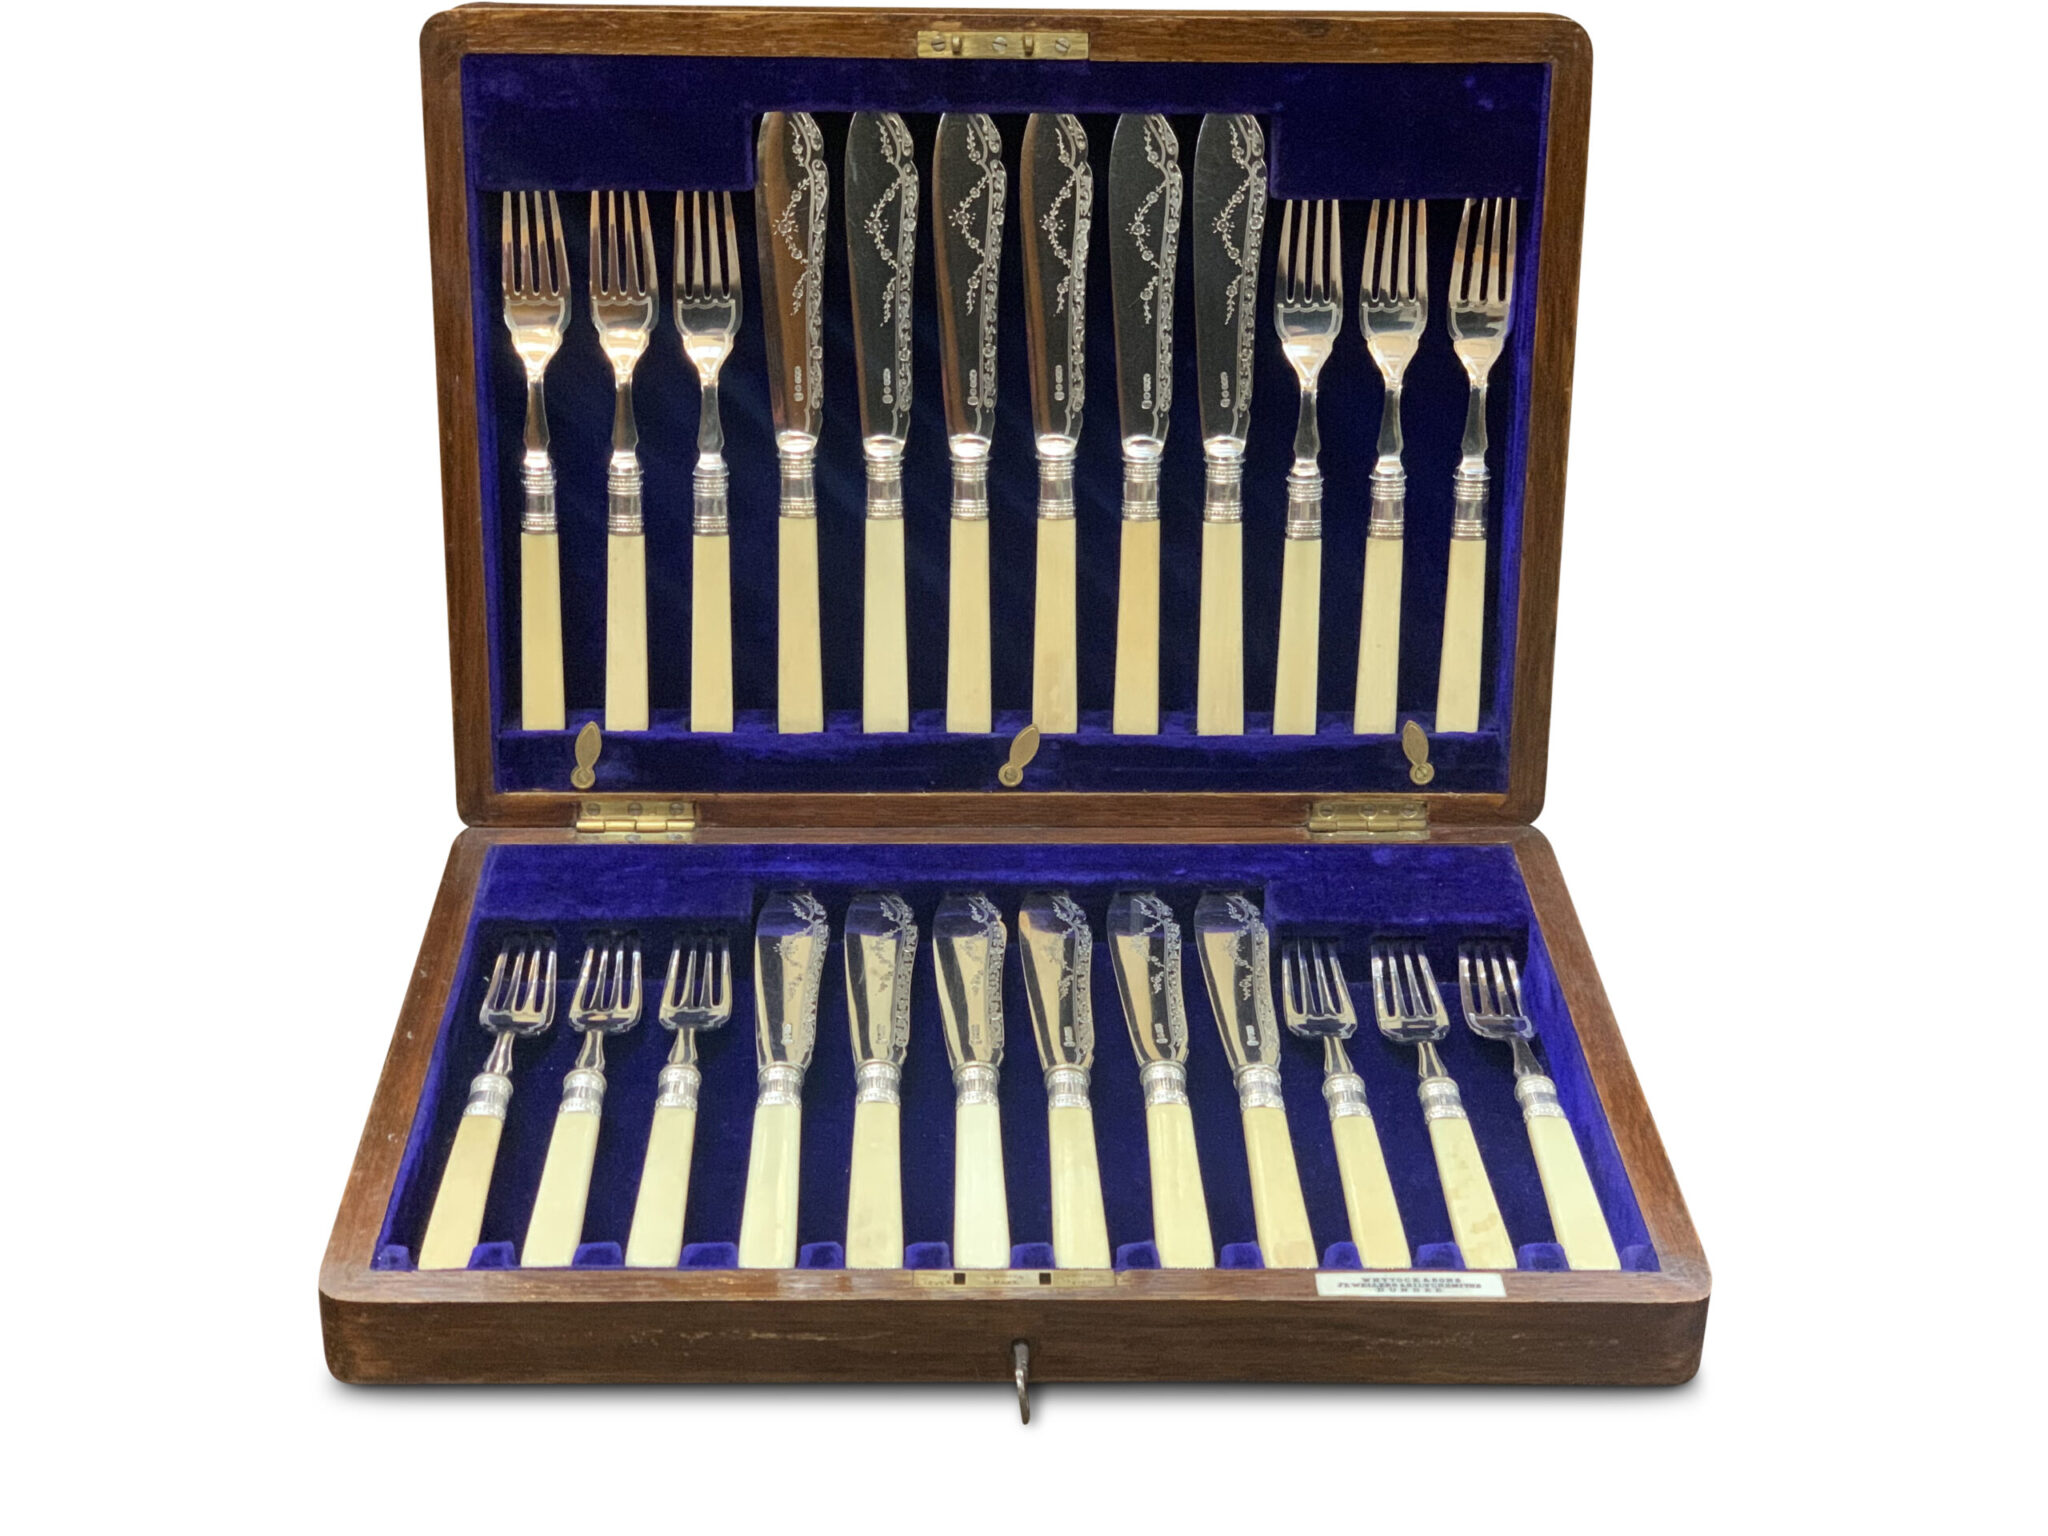 24 piece fish knives and forks scaled 1